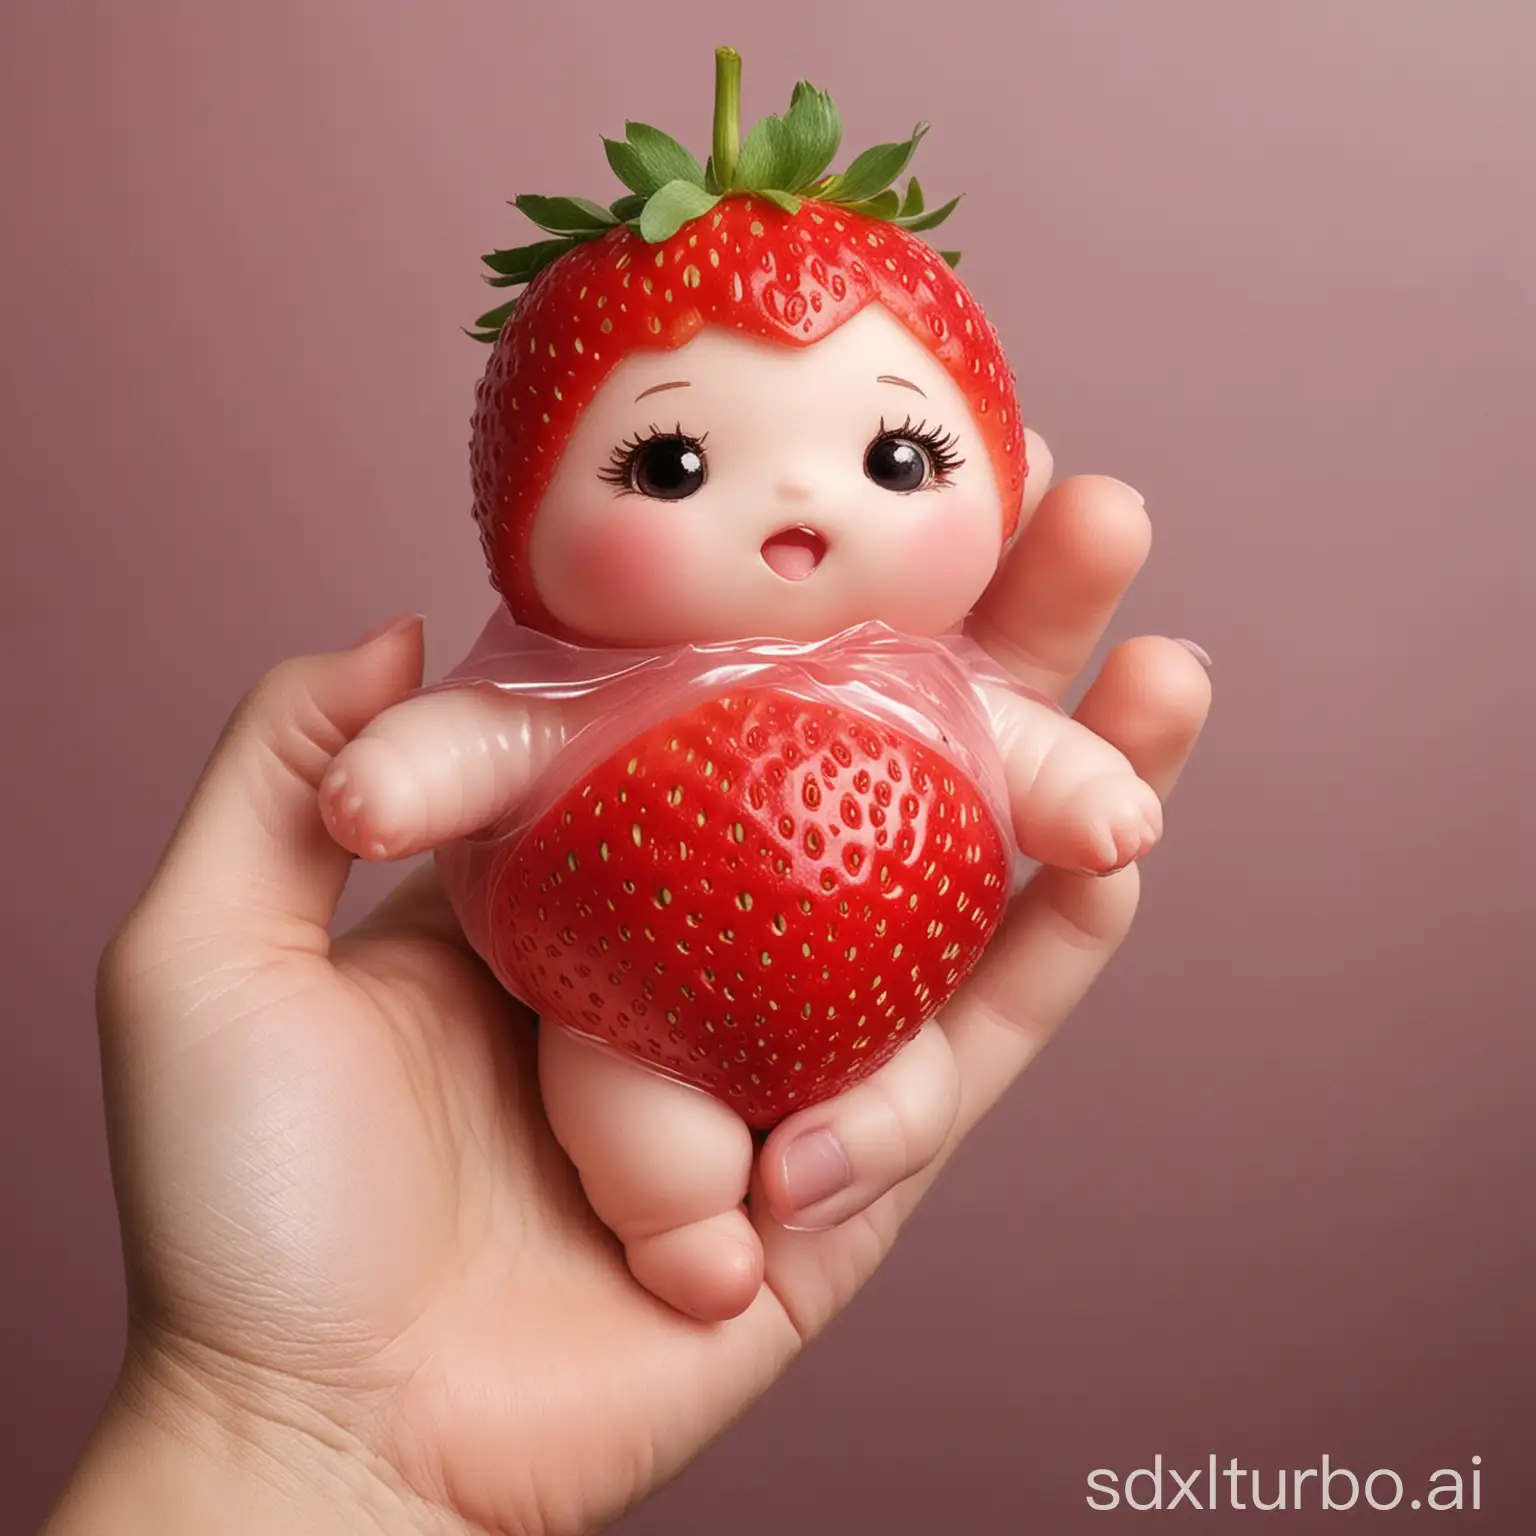 Strawberry-shaped cutie, she looks like a strawberry, her body wrapped in a complete strawberry.